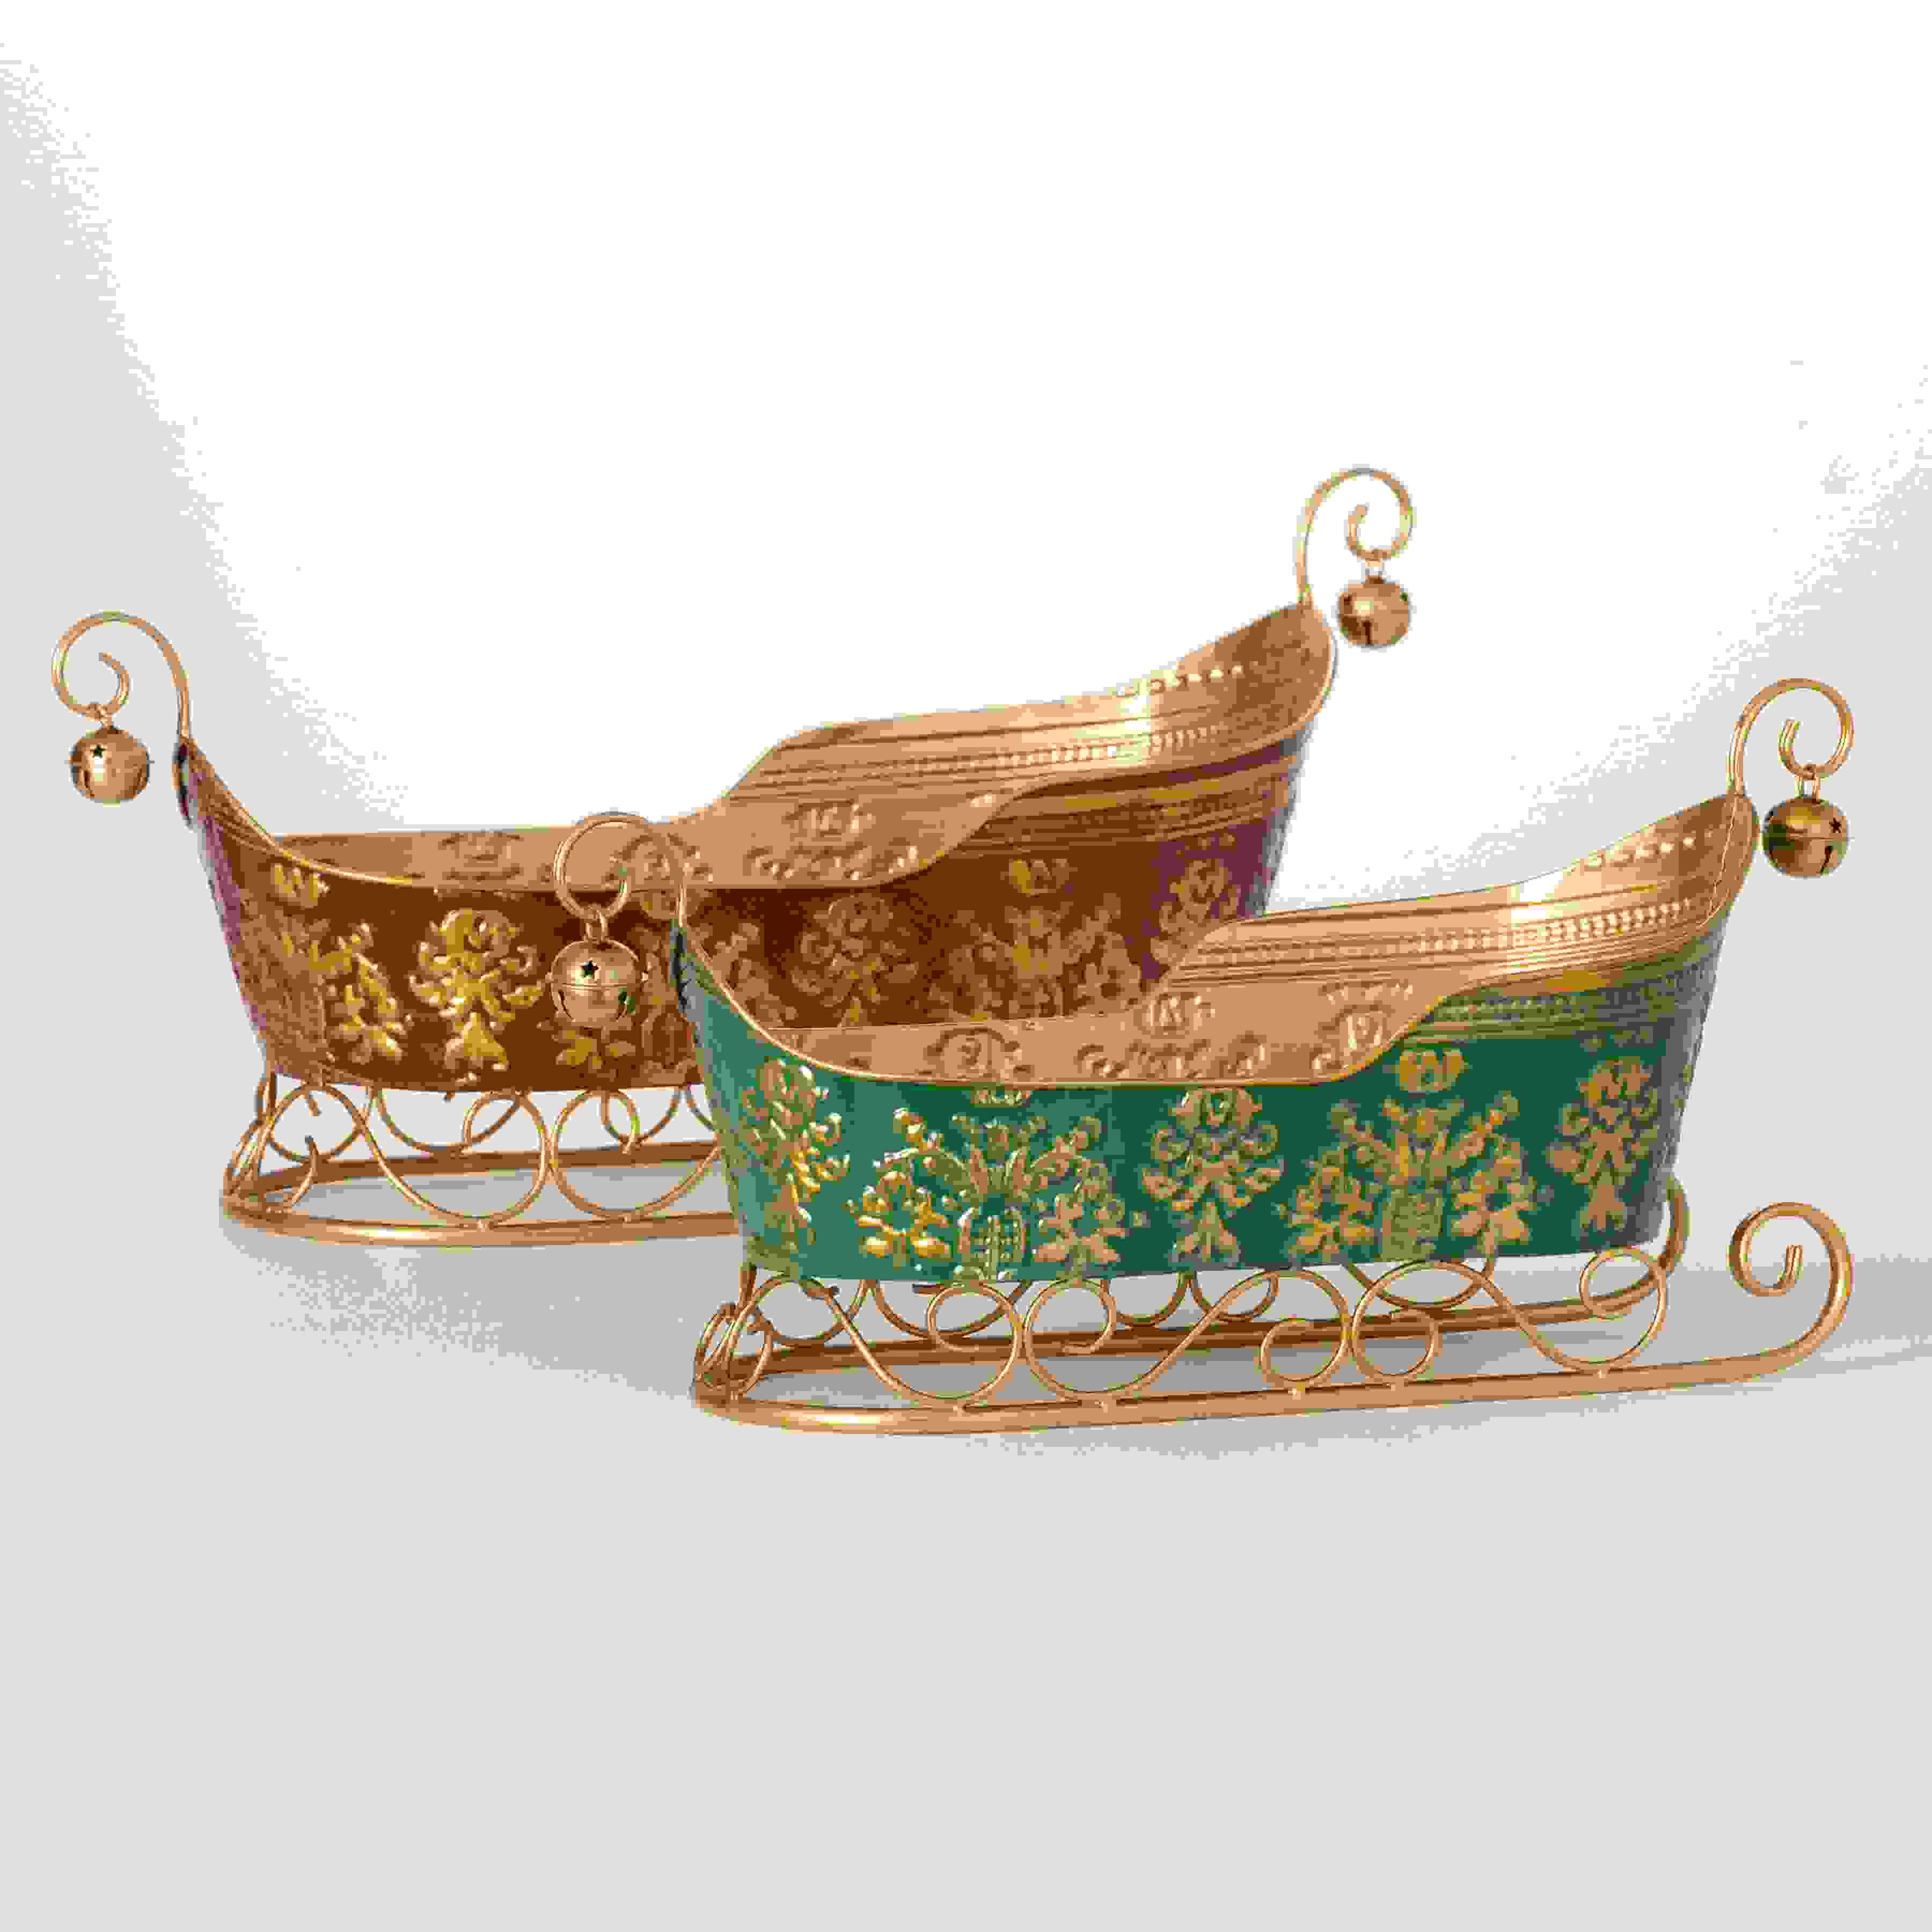 REGAL METAL SLEIGH CONTAINERS